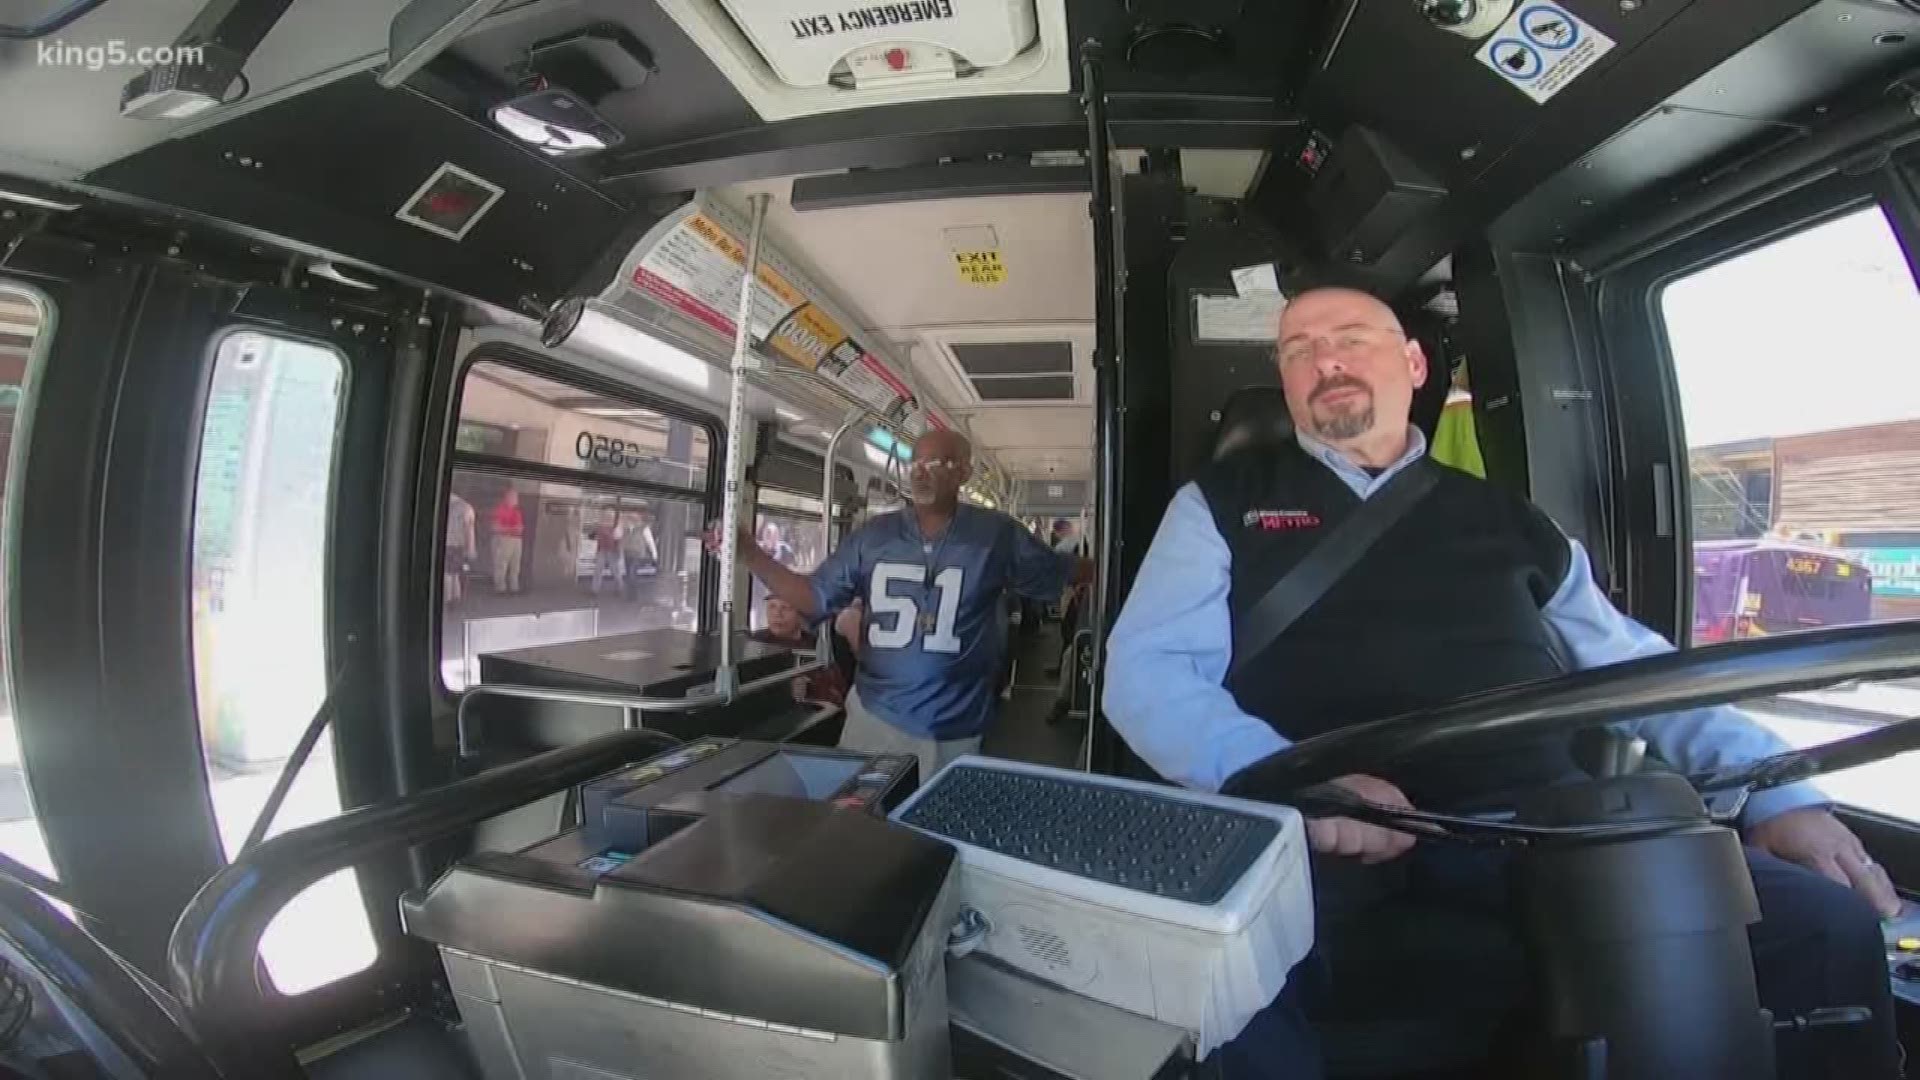 A King County Metro bus driver, who was shot and wounded in March, returned to work today. Eric Stark has been called a hero, but as KING 5's Michael Crowe reports, he's just glad to get back to normal.